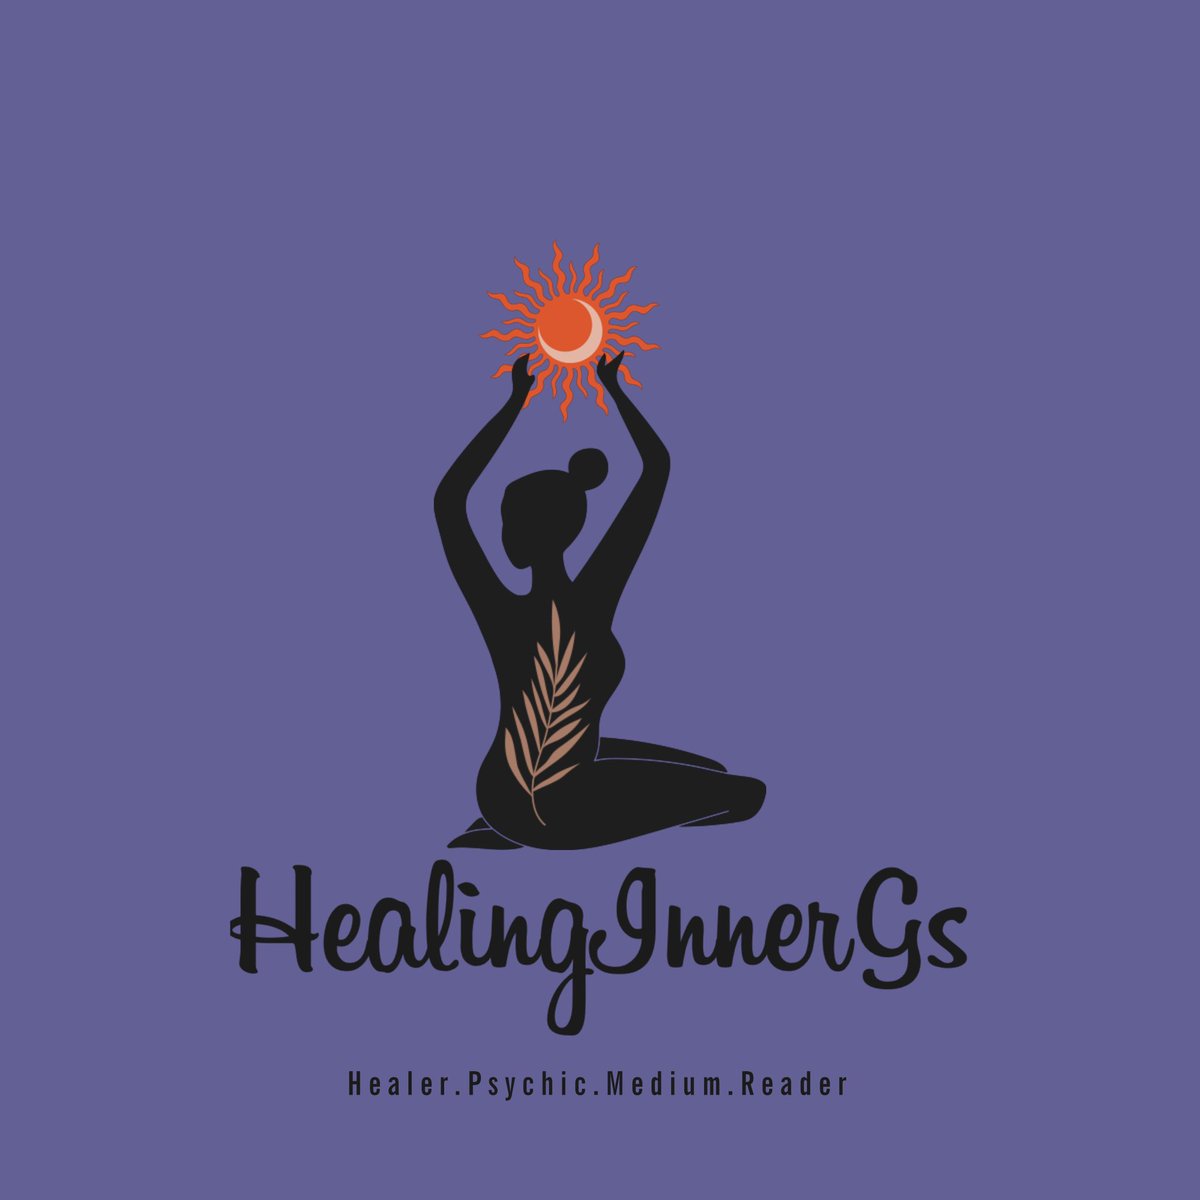 HealingInnerGs is openReadings are available via email,phone and now video Emailed tat : 5-10 business days $15 rush fee to receive within 48hrsAstro & Numerology readings 7-14 business DaysPhone : Tuesday-Friday 1-9 pm ESTDM or check out  http://Facebook.com/healinginnergs 